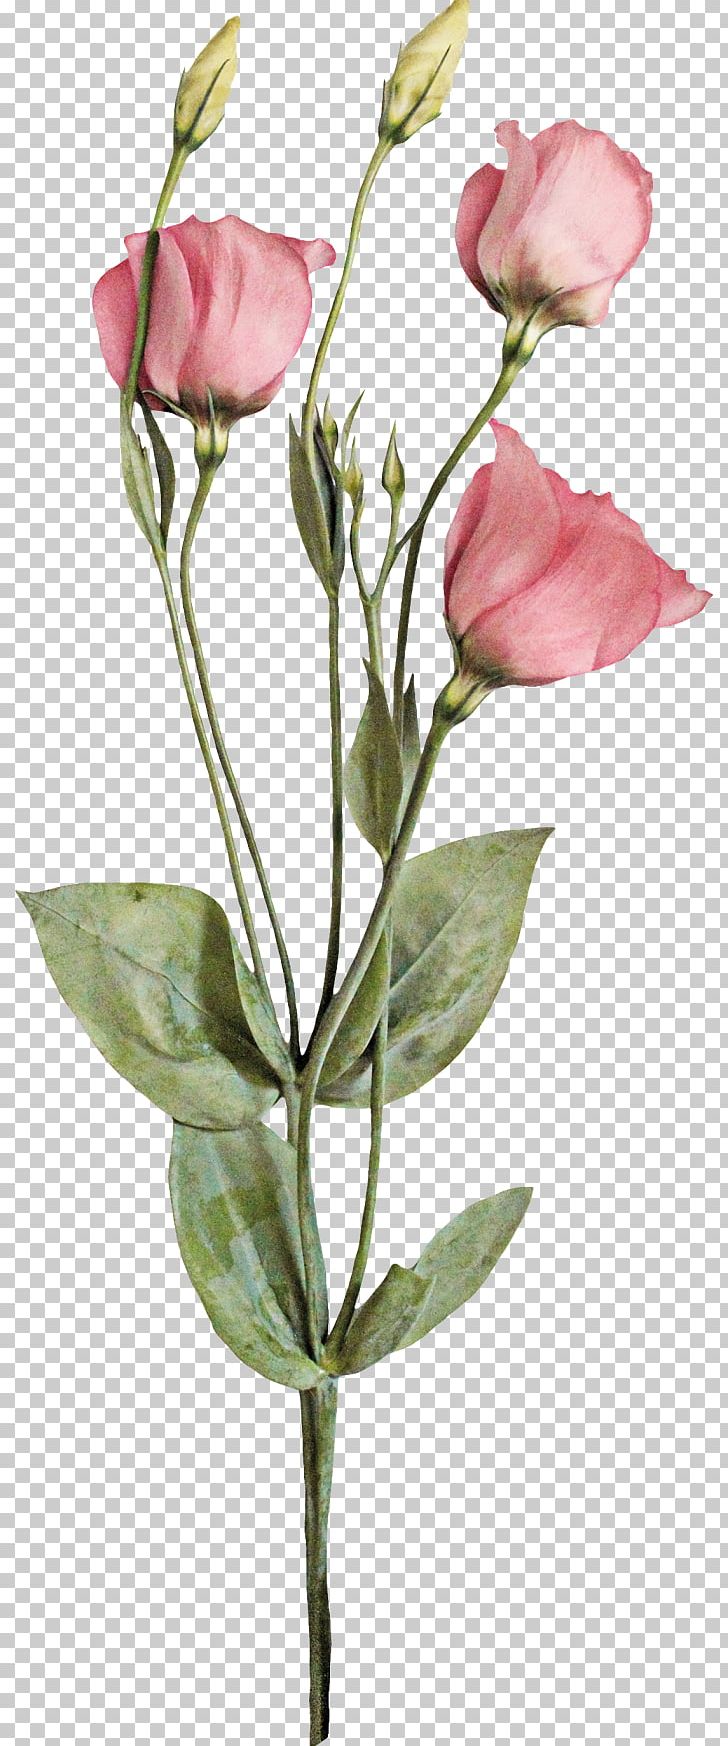 Garden Roses Centifolia Roses Cut Flowers Bud Plant Stem PNG, Clipart, Branch, Bud, Centifolia Roses, Cut Flowers, Decoration Free PNG Download